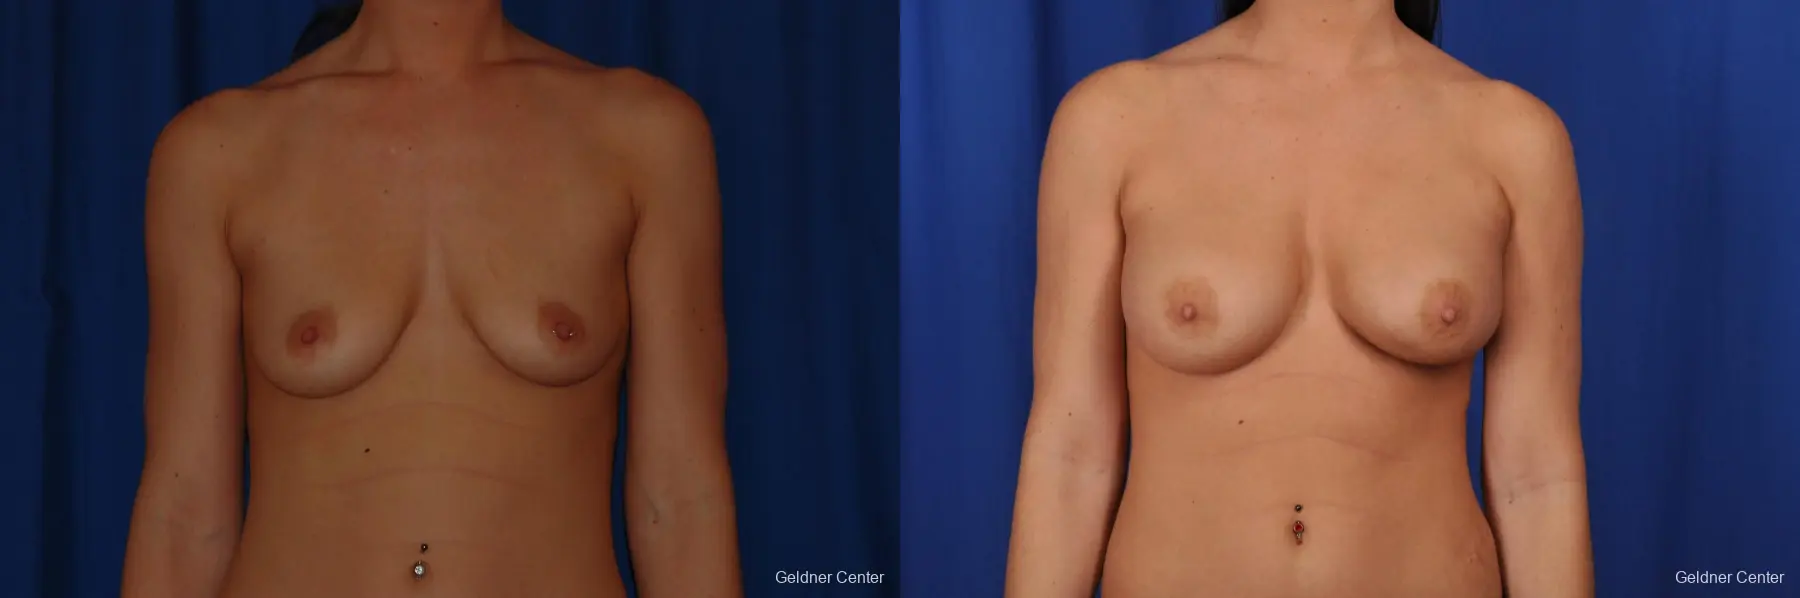 Breast Augmentation Streeterville, Chicago 2071 - Before and After 1